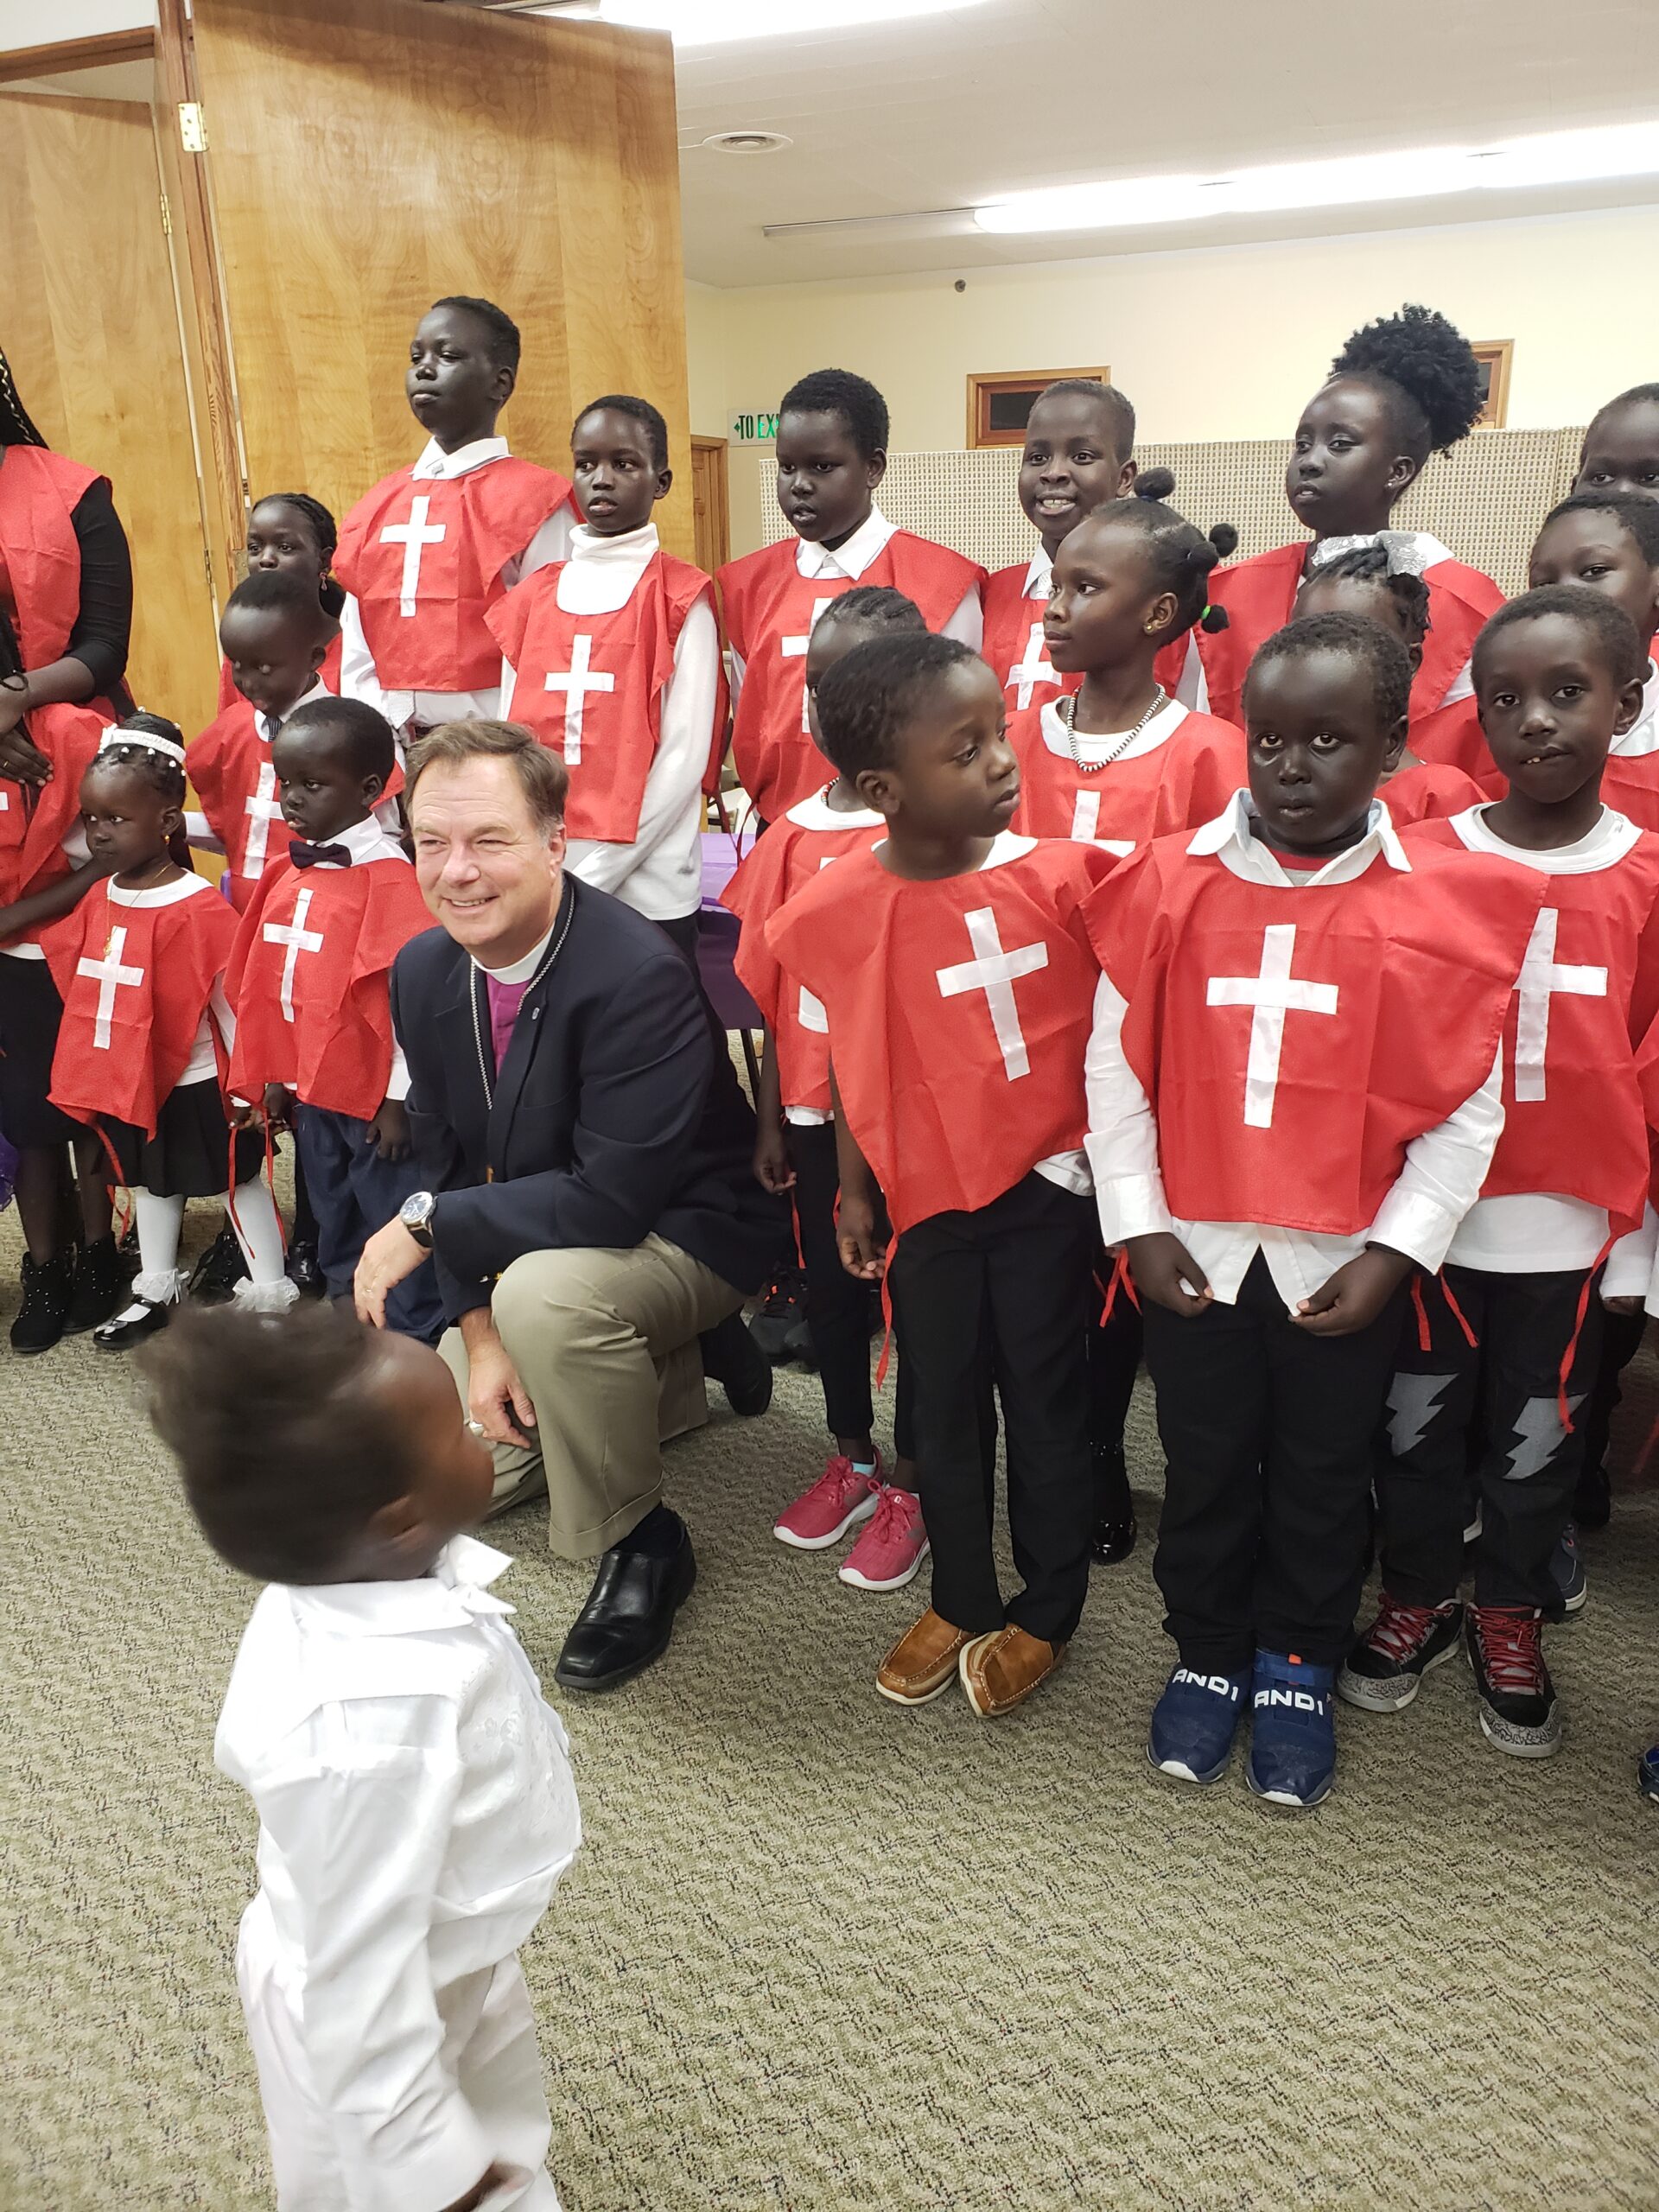 Bishop Rickel with youth from St. John's South Sudanese Church.